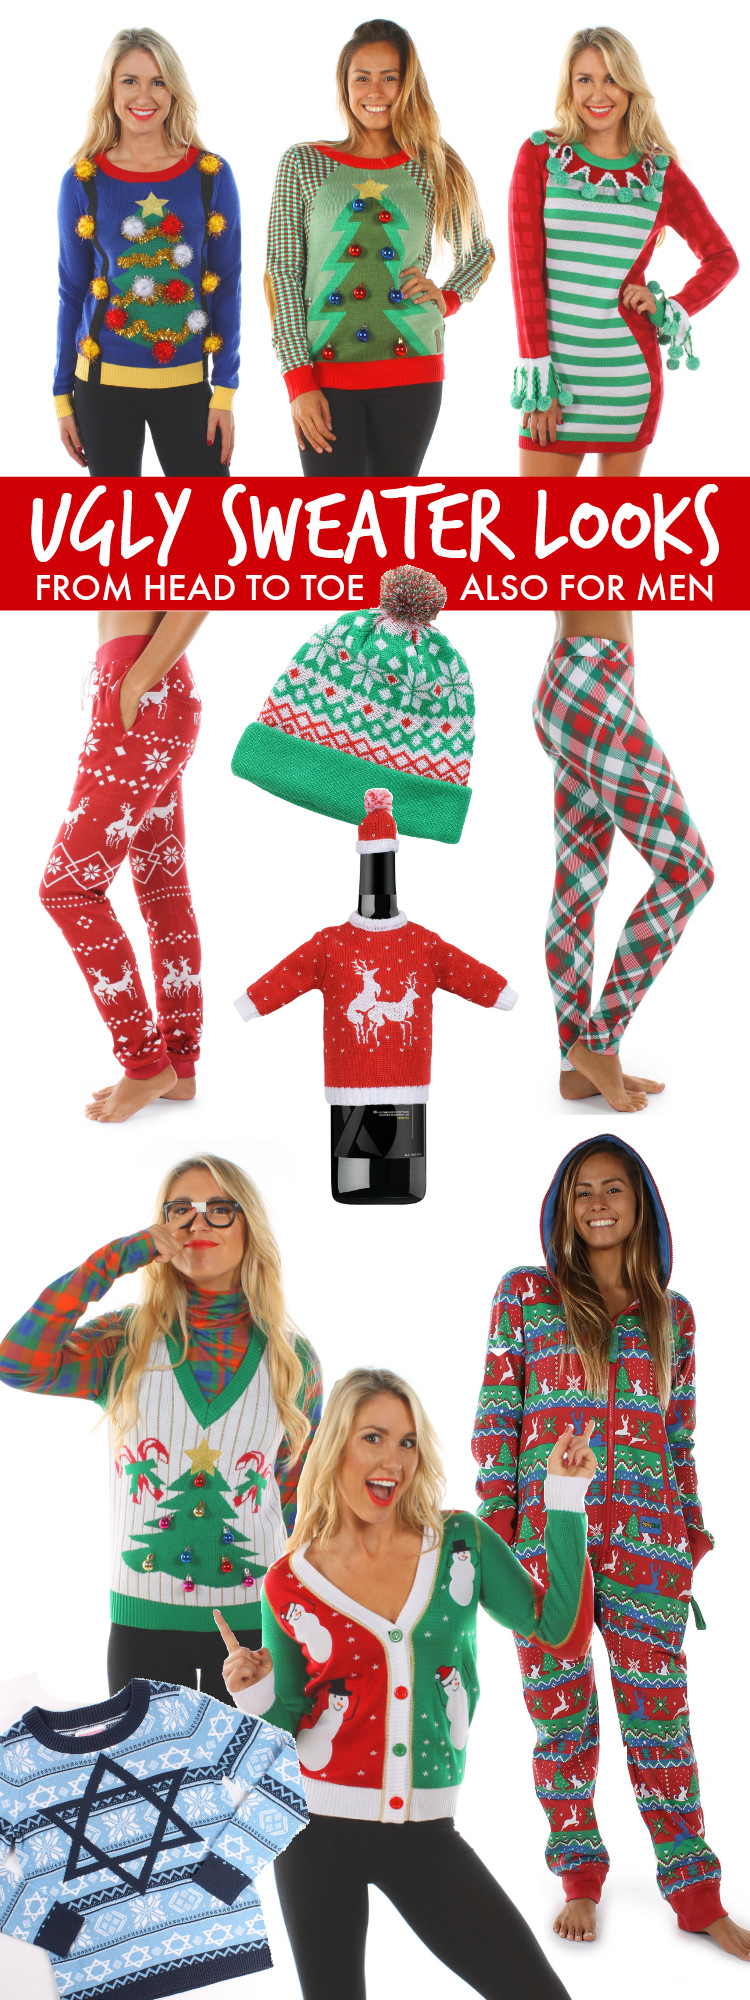 Christmas Sweater Ideas For A Party
 Ugly Christmas Sweater Party Looks Oh My Creative